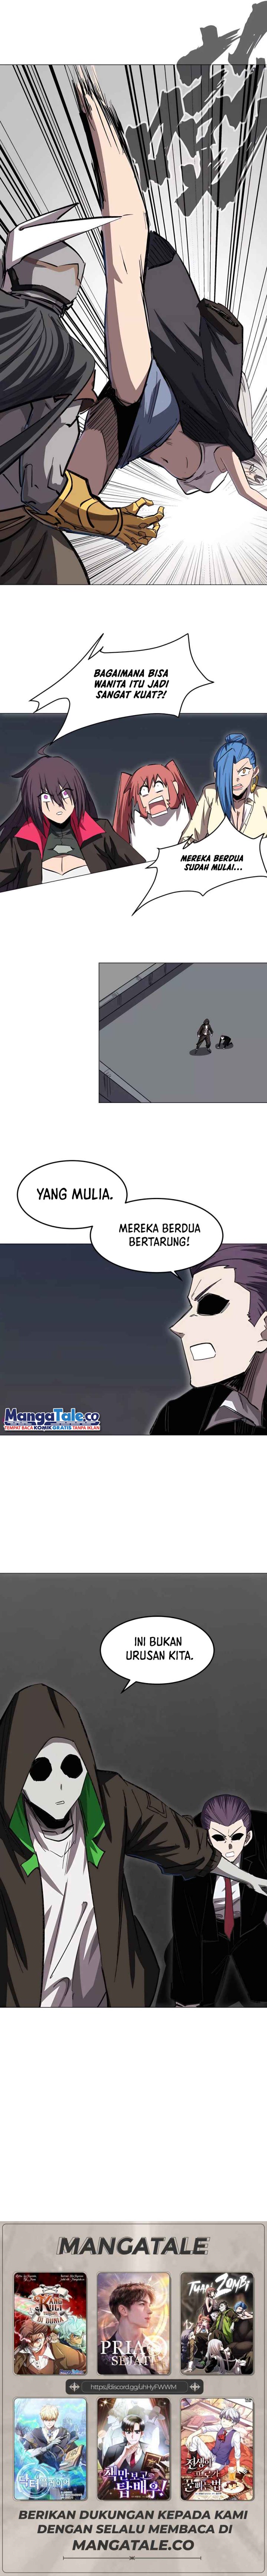 Mr. Zombie Chapter 58